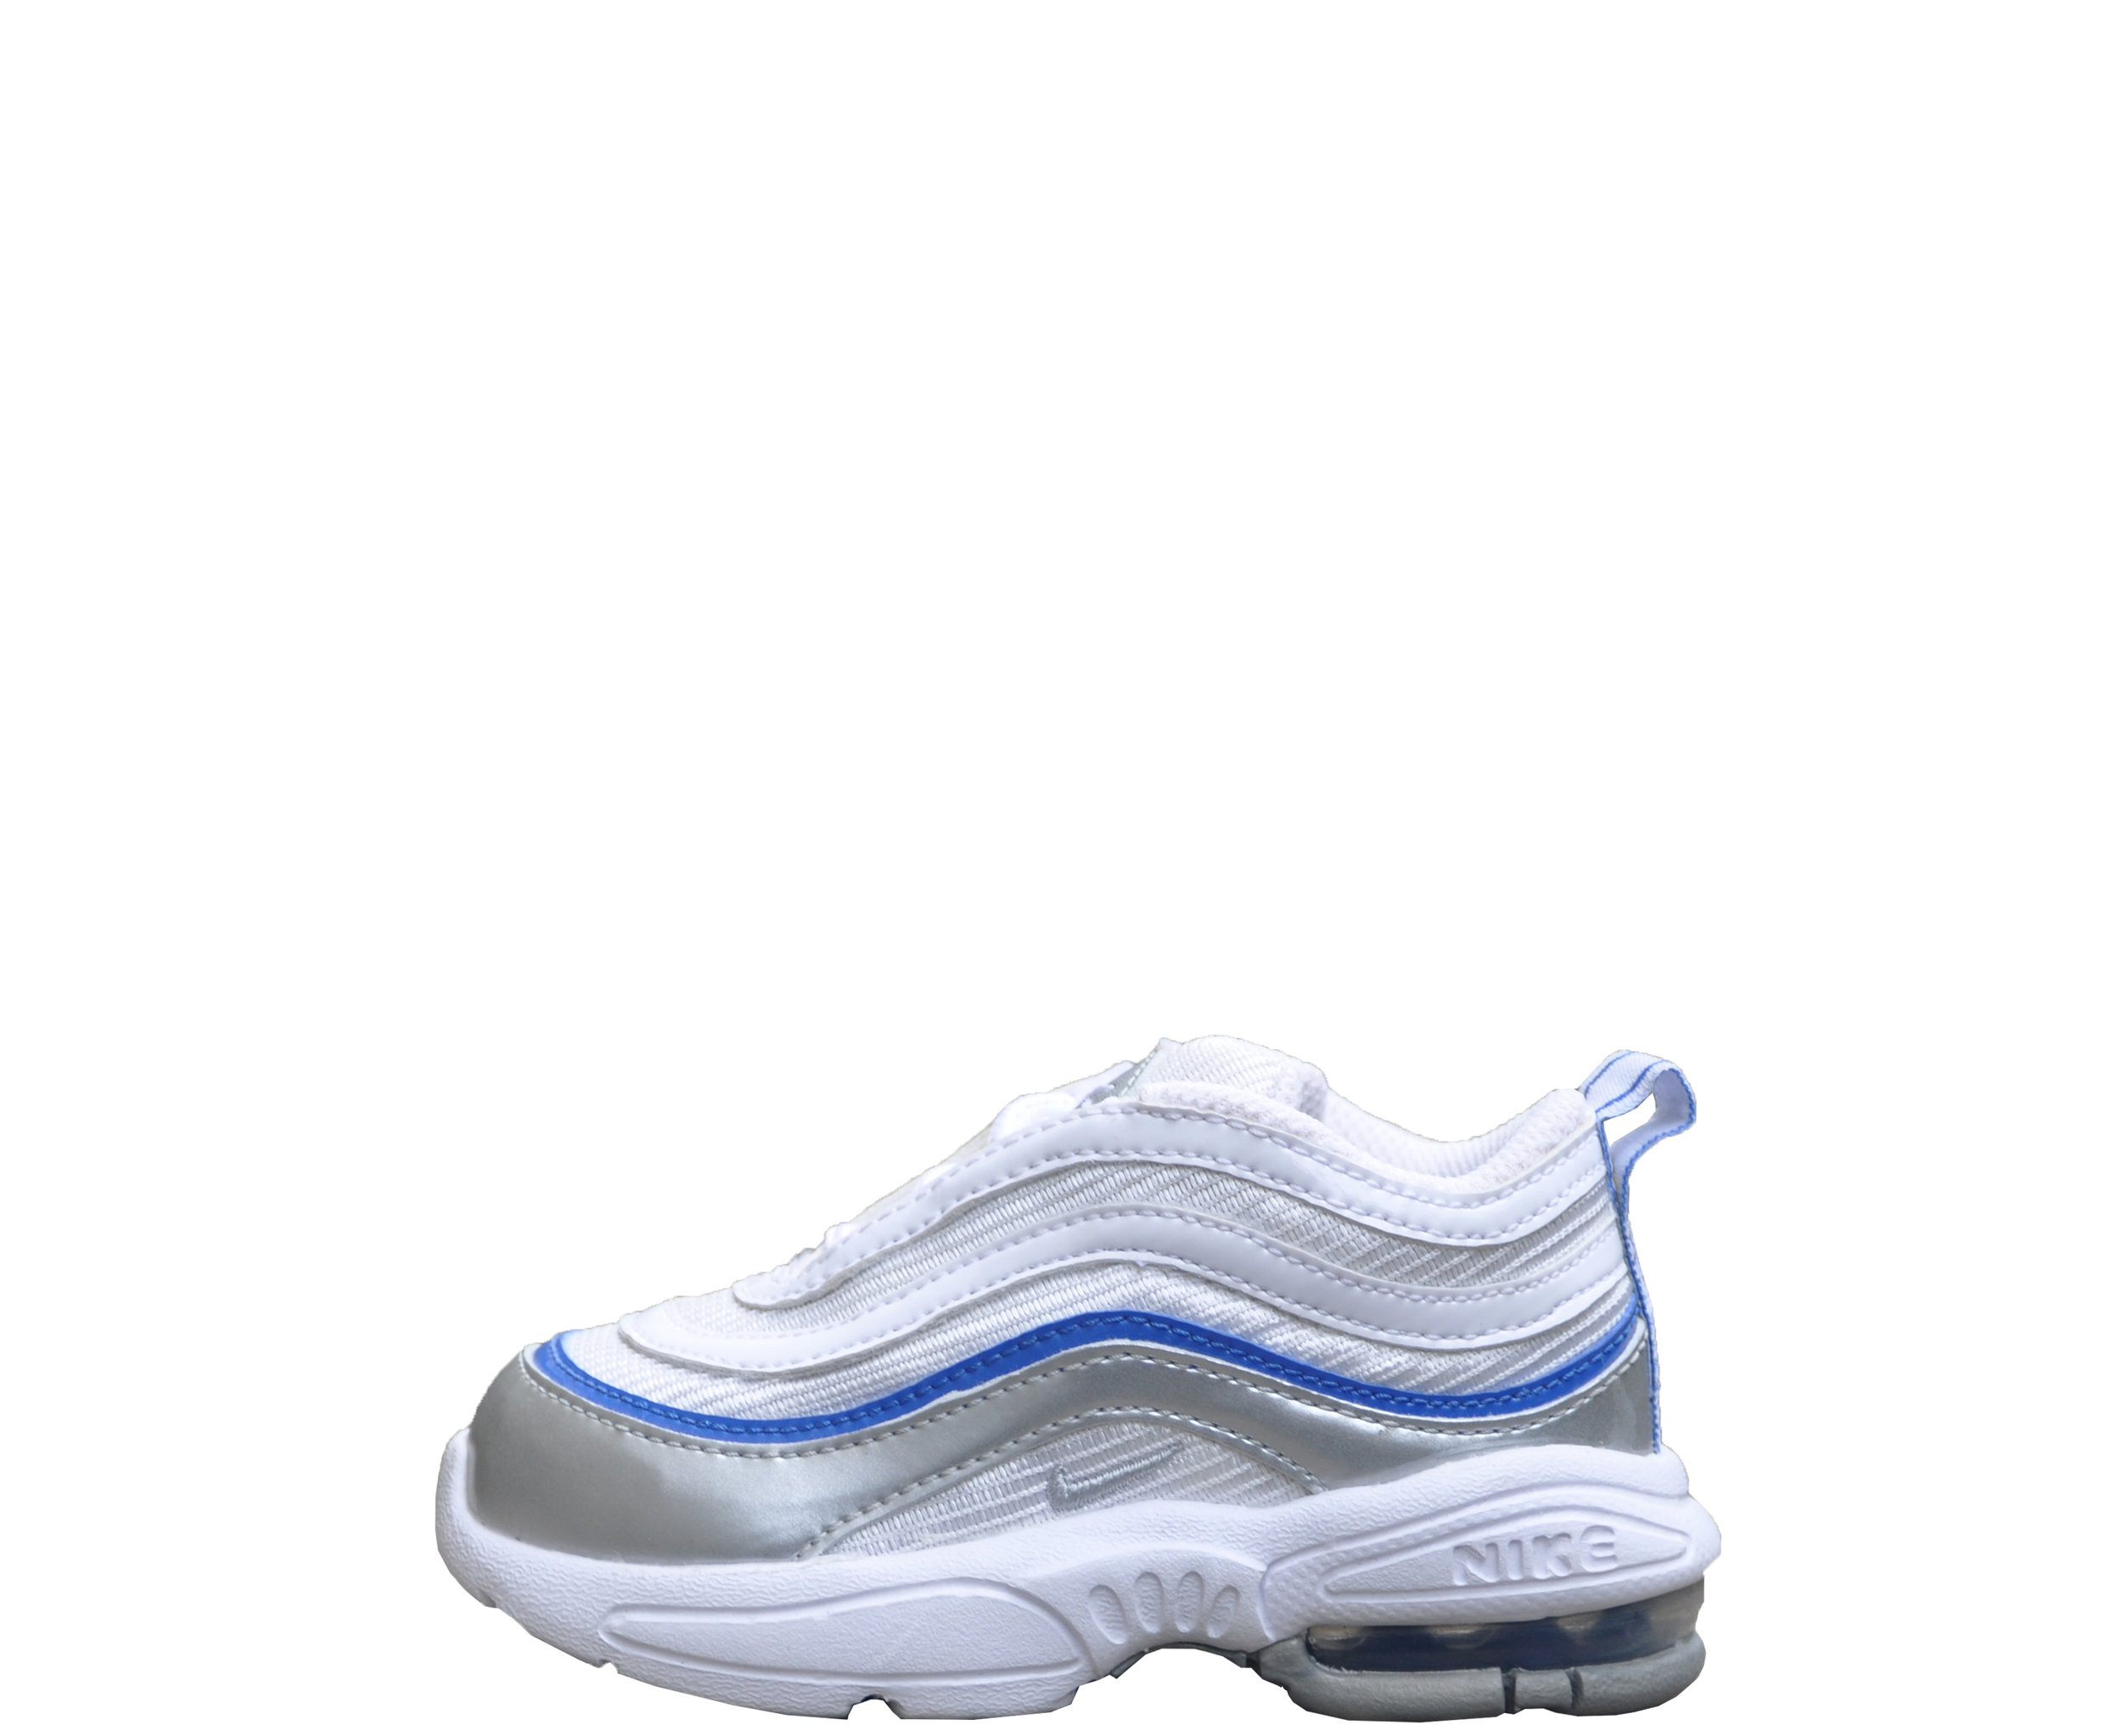 nike air max 97 pink white Westfield Fishery